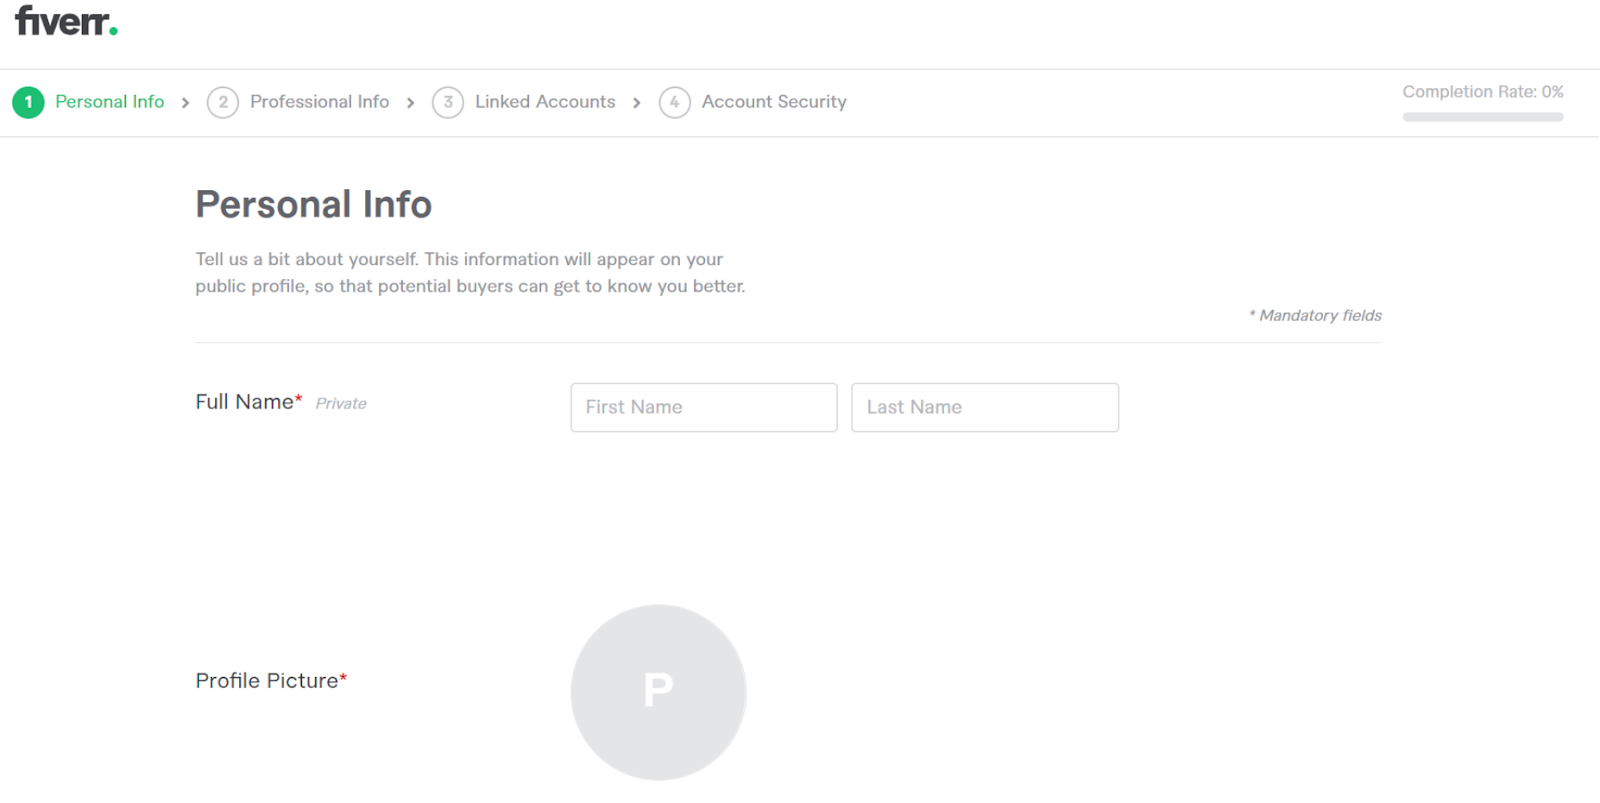 Creating an account on Fiverr - Personal Info page